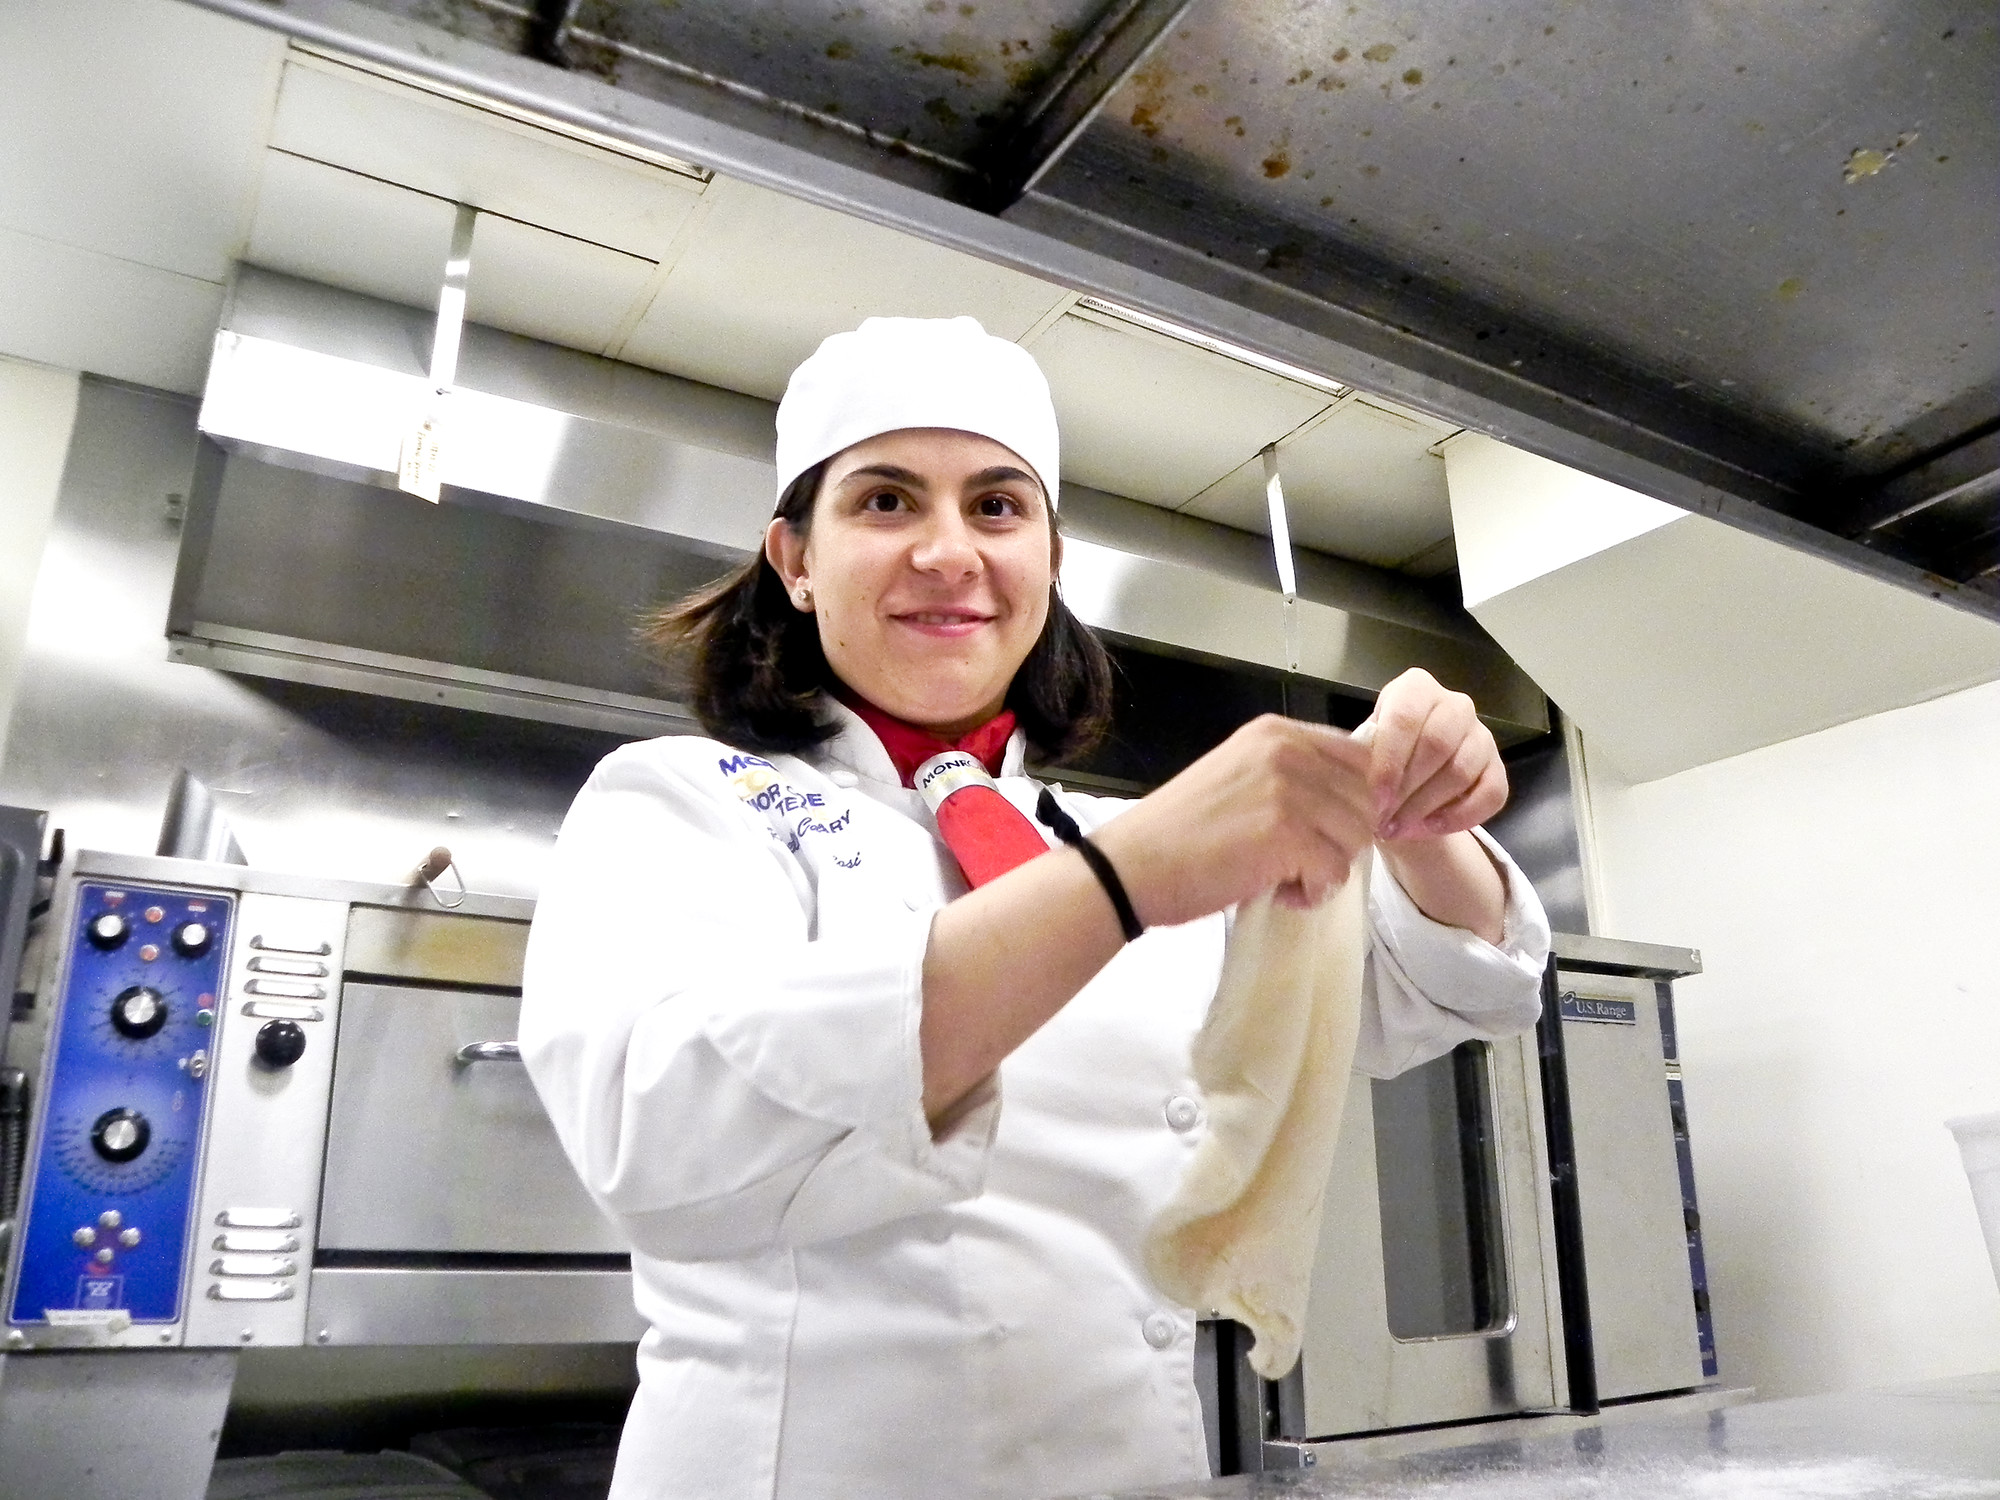 Rossella Cangialosi, 20, here cooking pizza at the School of Hospitality Management and Culinary Arts at Monroe College, has been passionate about cooking since she was 6 years old. The 2012 East Meadow High School graduate competed for the title of Student Chef of the Year in Florida on Aug. 1.